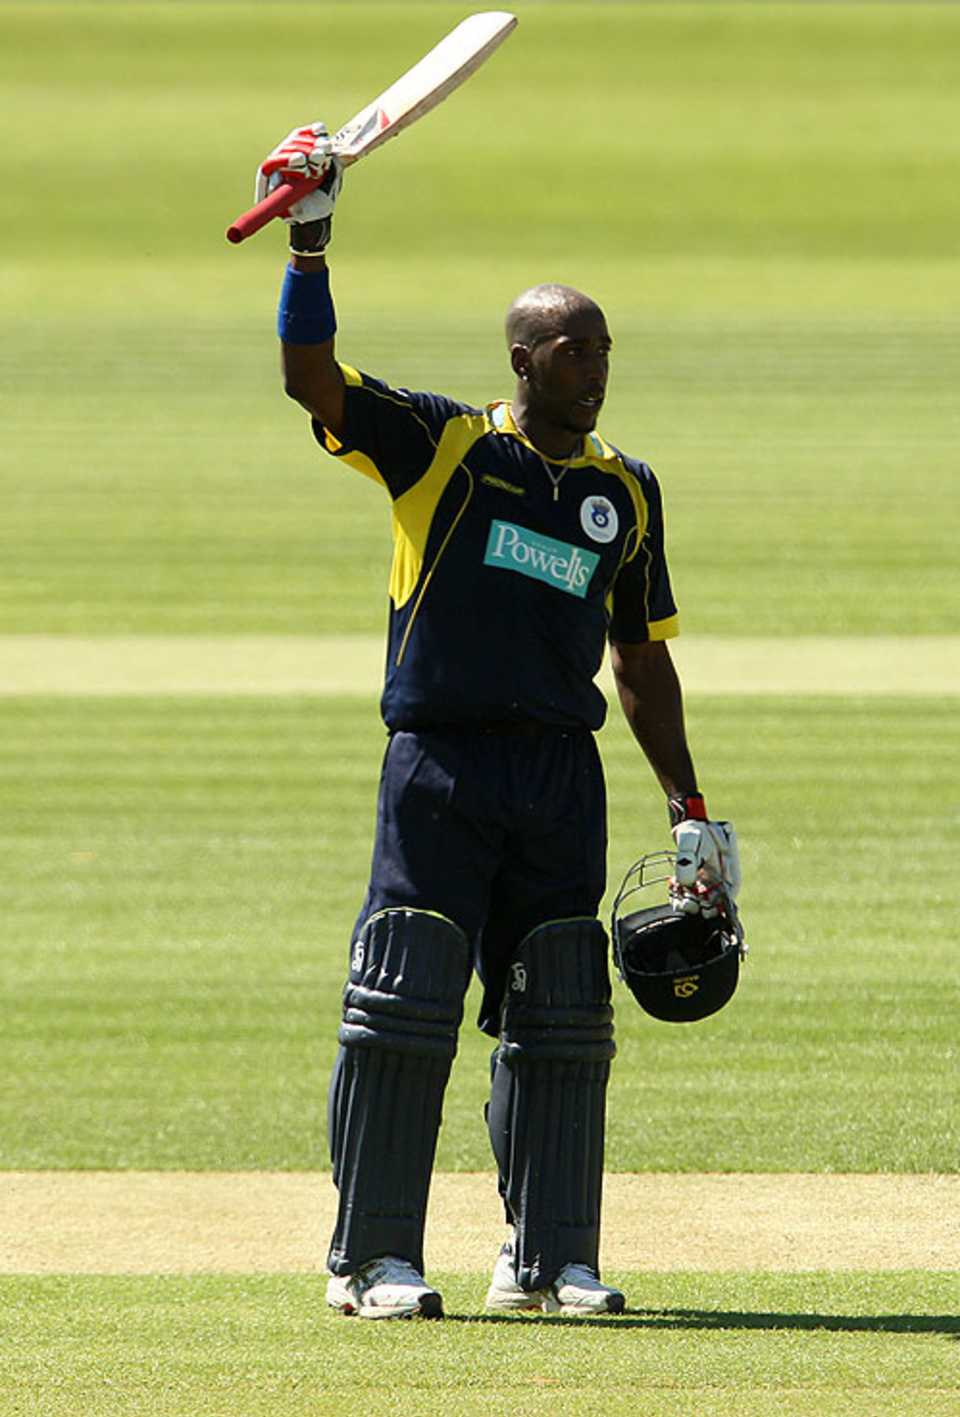 Michael Carberry's hundred came from just 64 balls